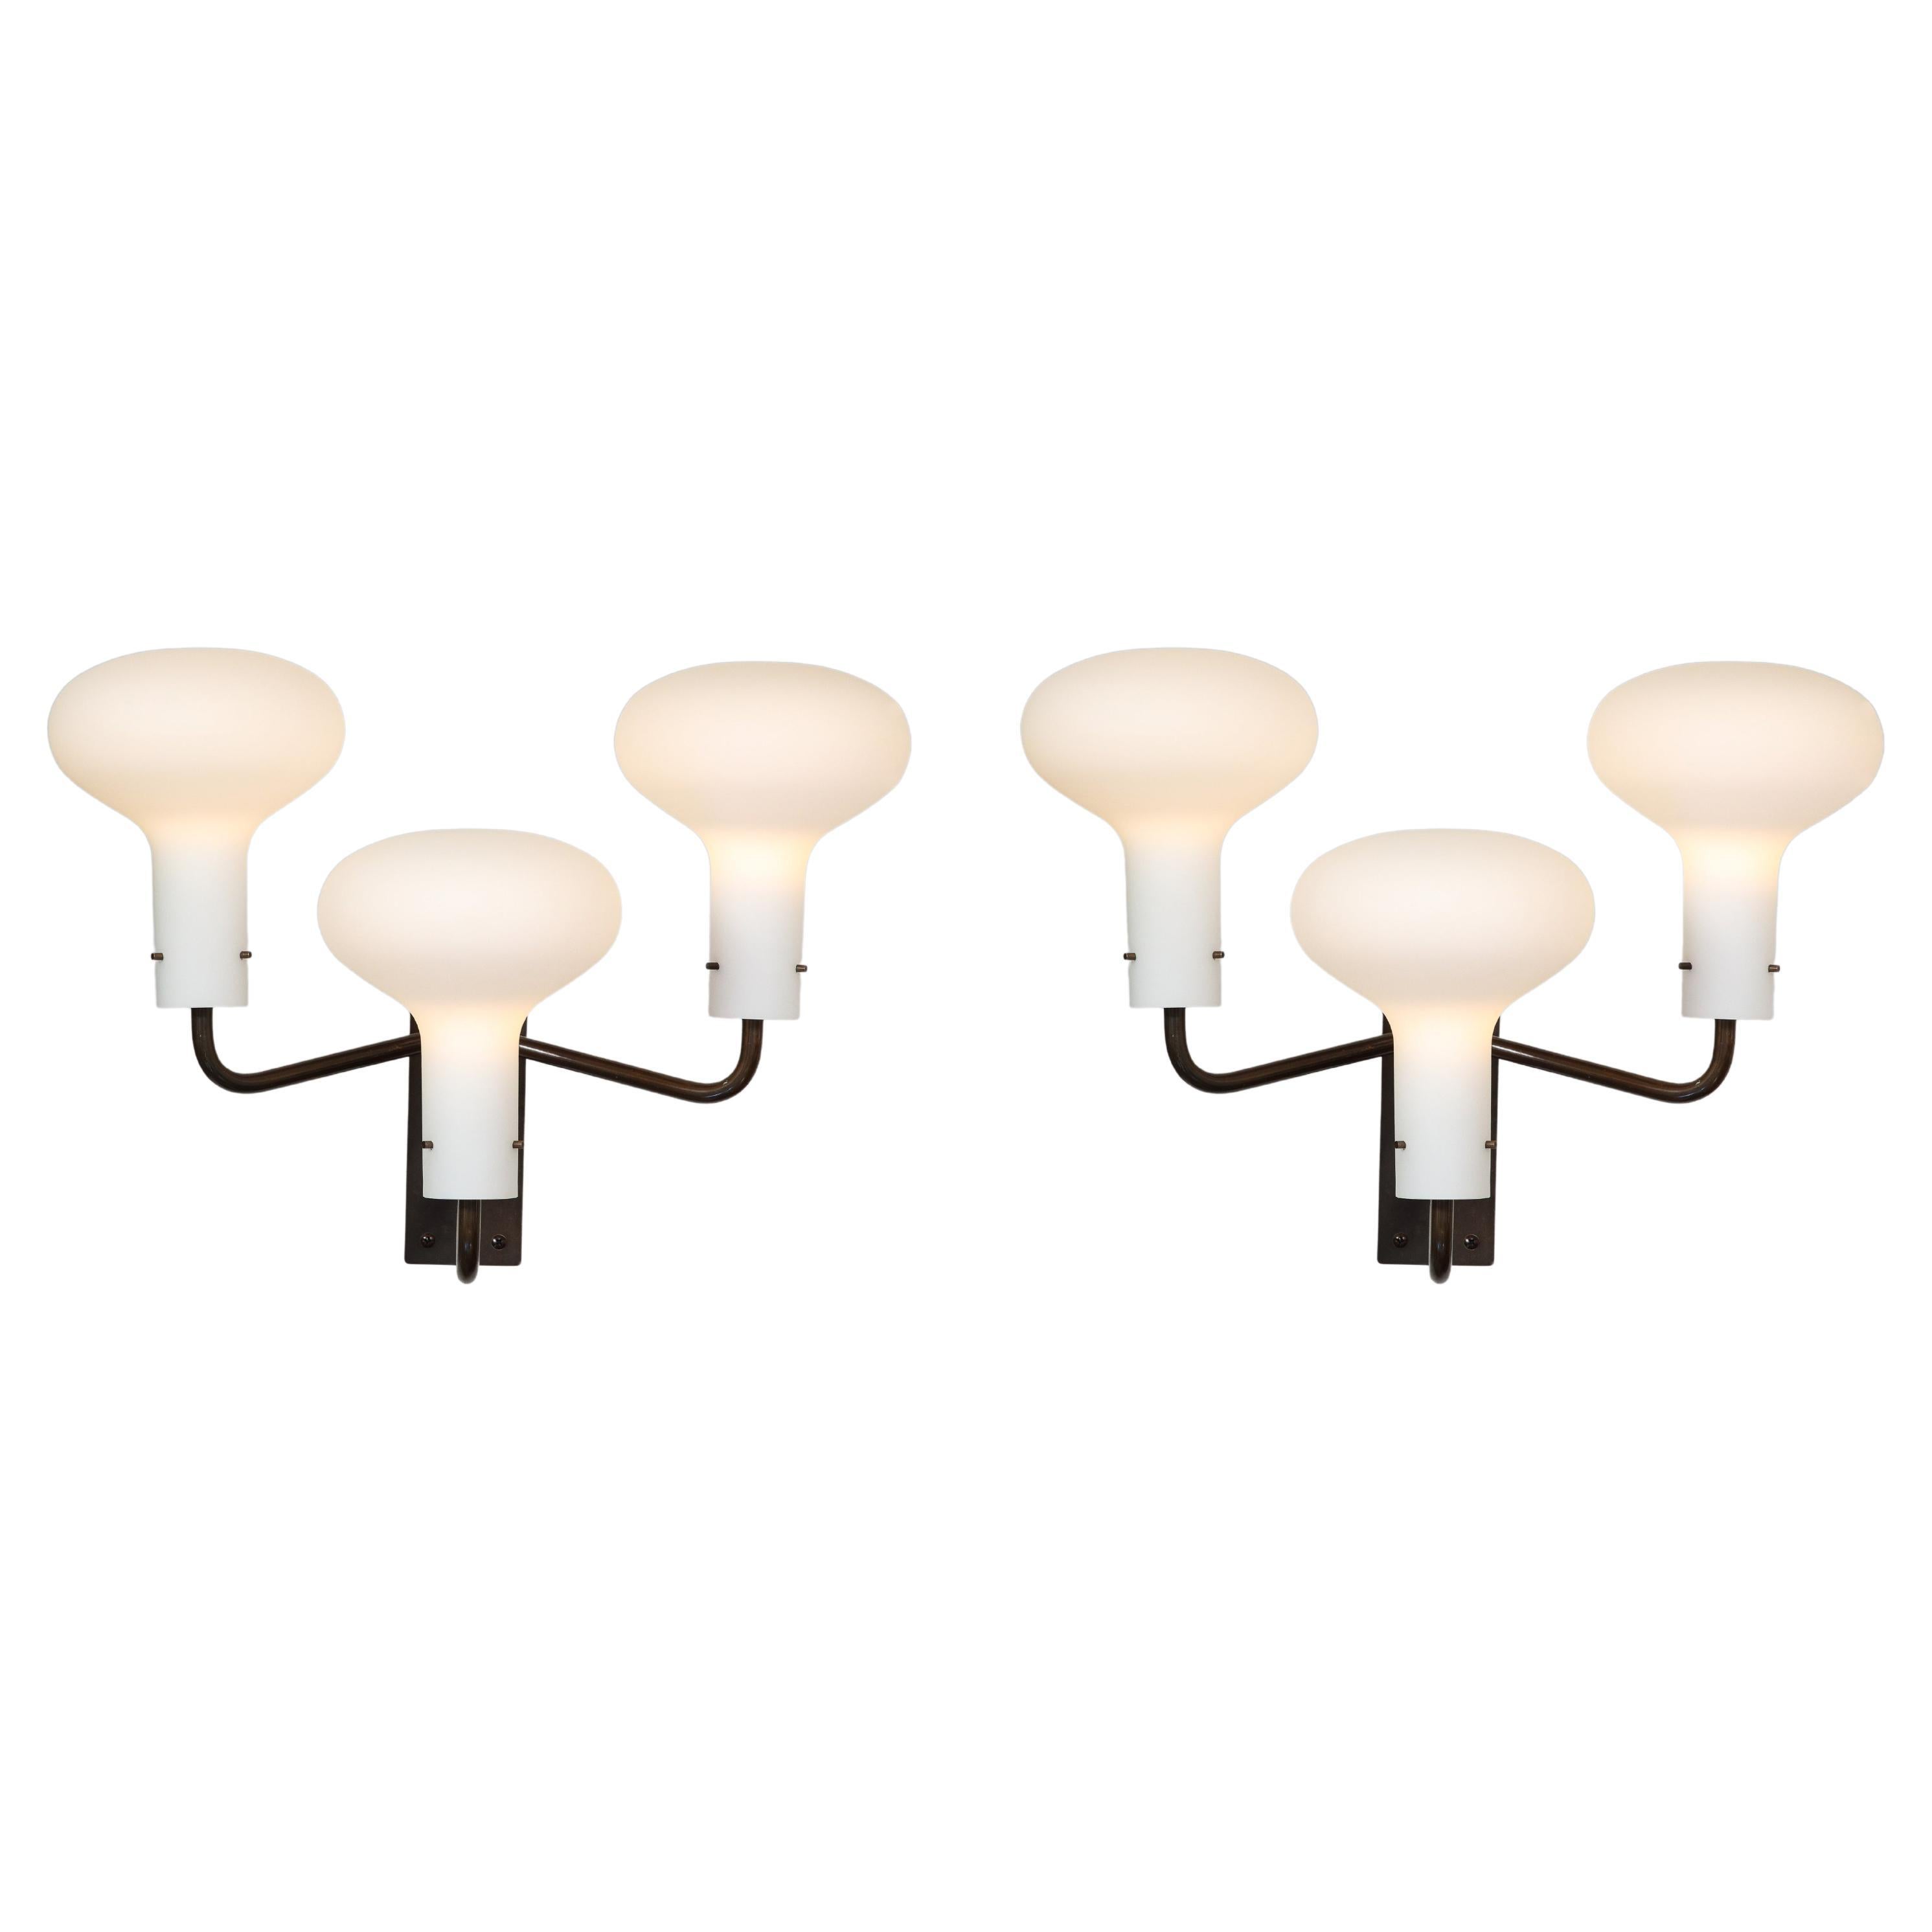 Ignazio Gardella for Azucena Pair of Wall Lights Model LP12, Italy, 1950s For Sale